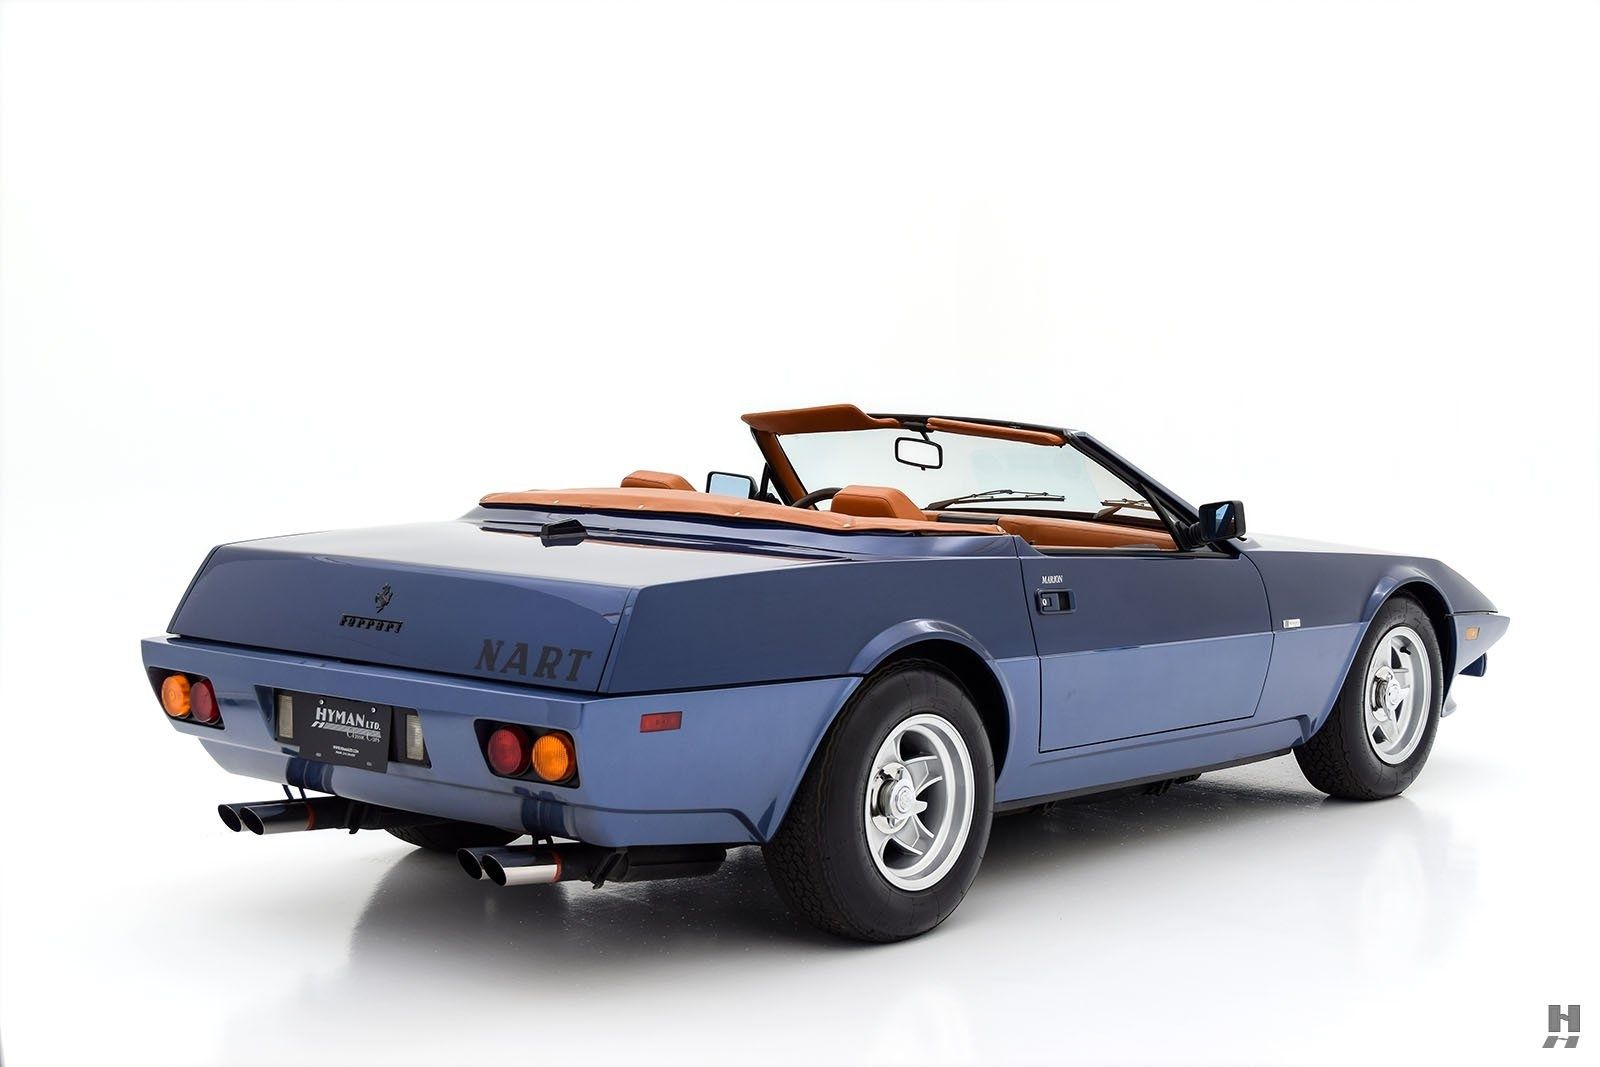 This Ferrari 365 NART Spyder Can Be Your Perfect Pebble Beach Cruiser